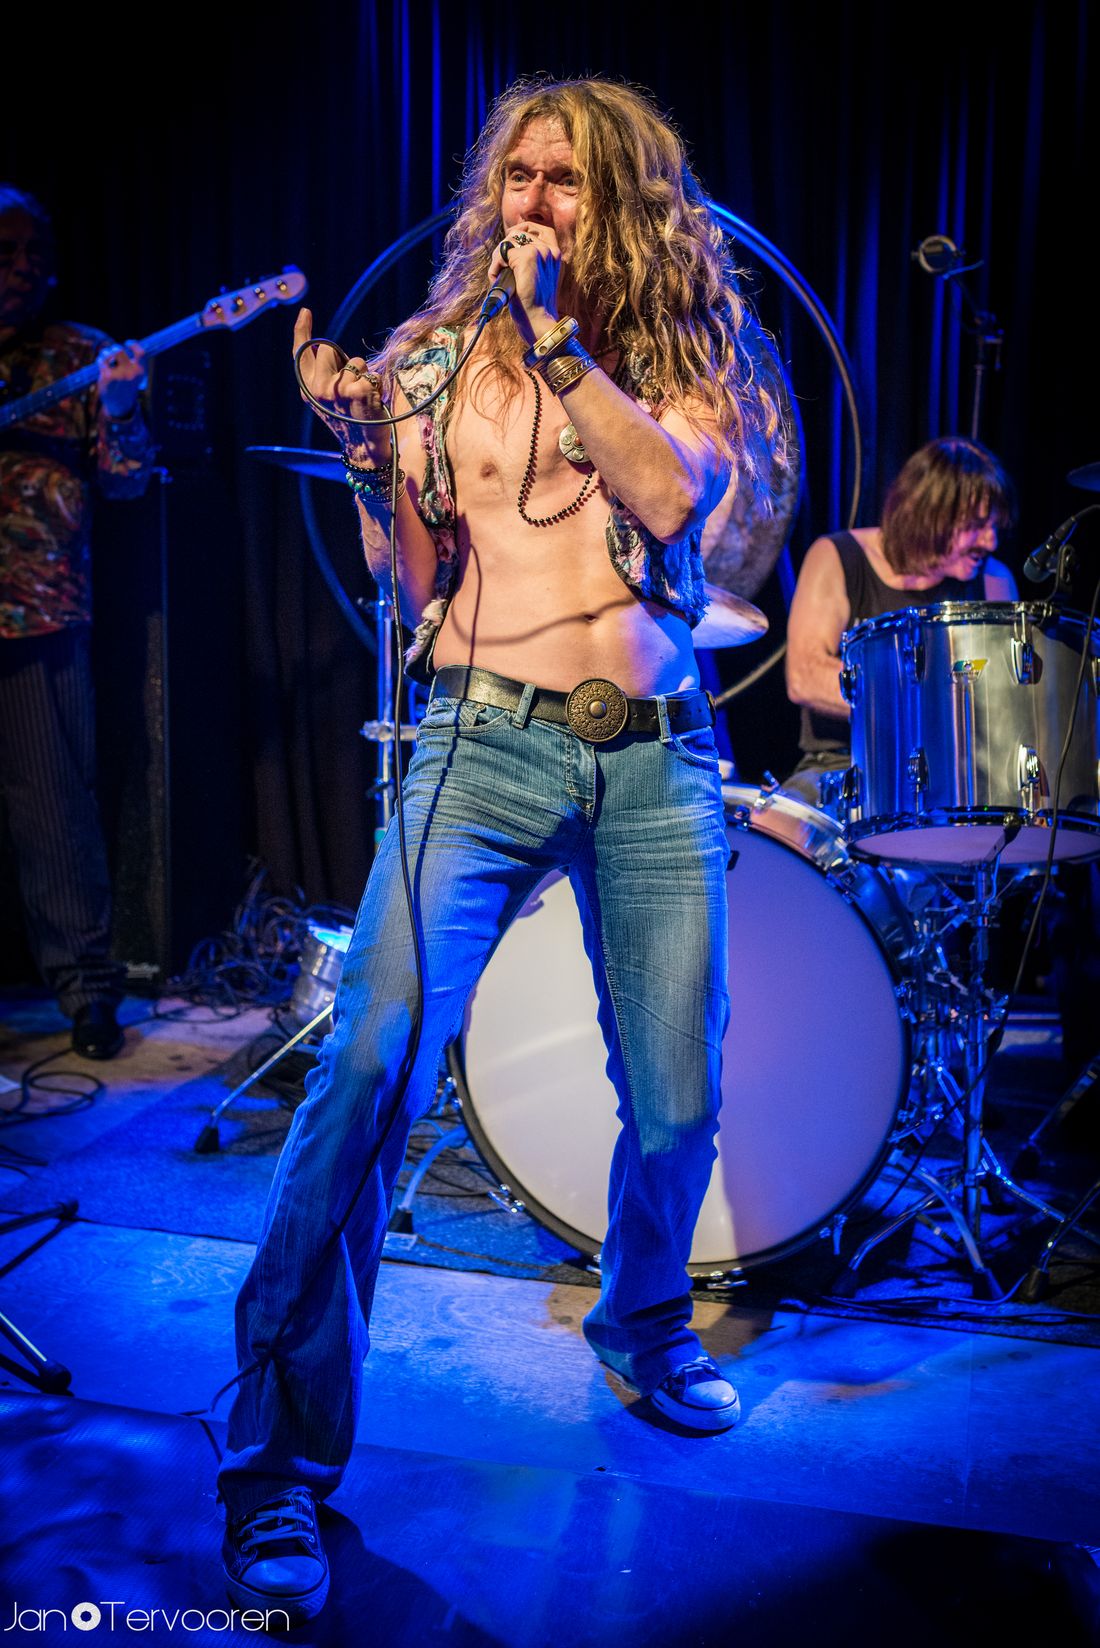 Lead Zeppelin - Led Zeppelin Coverband am 18.10.2015 live im blues in Rhede